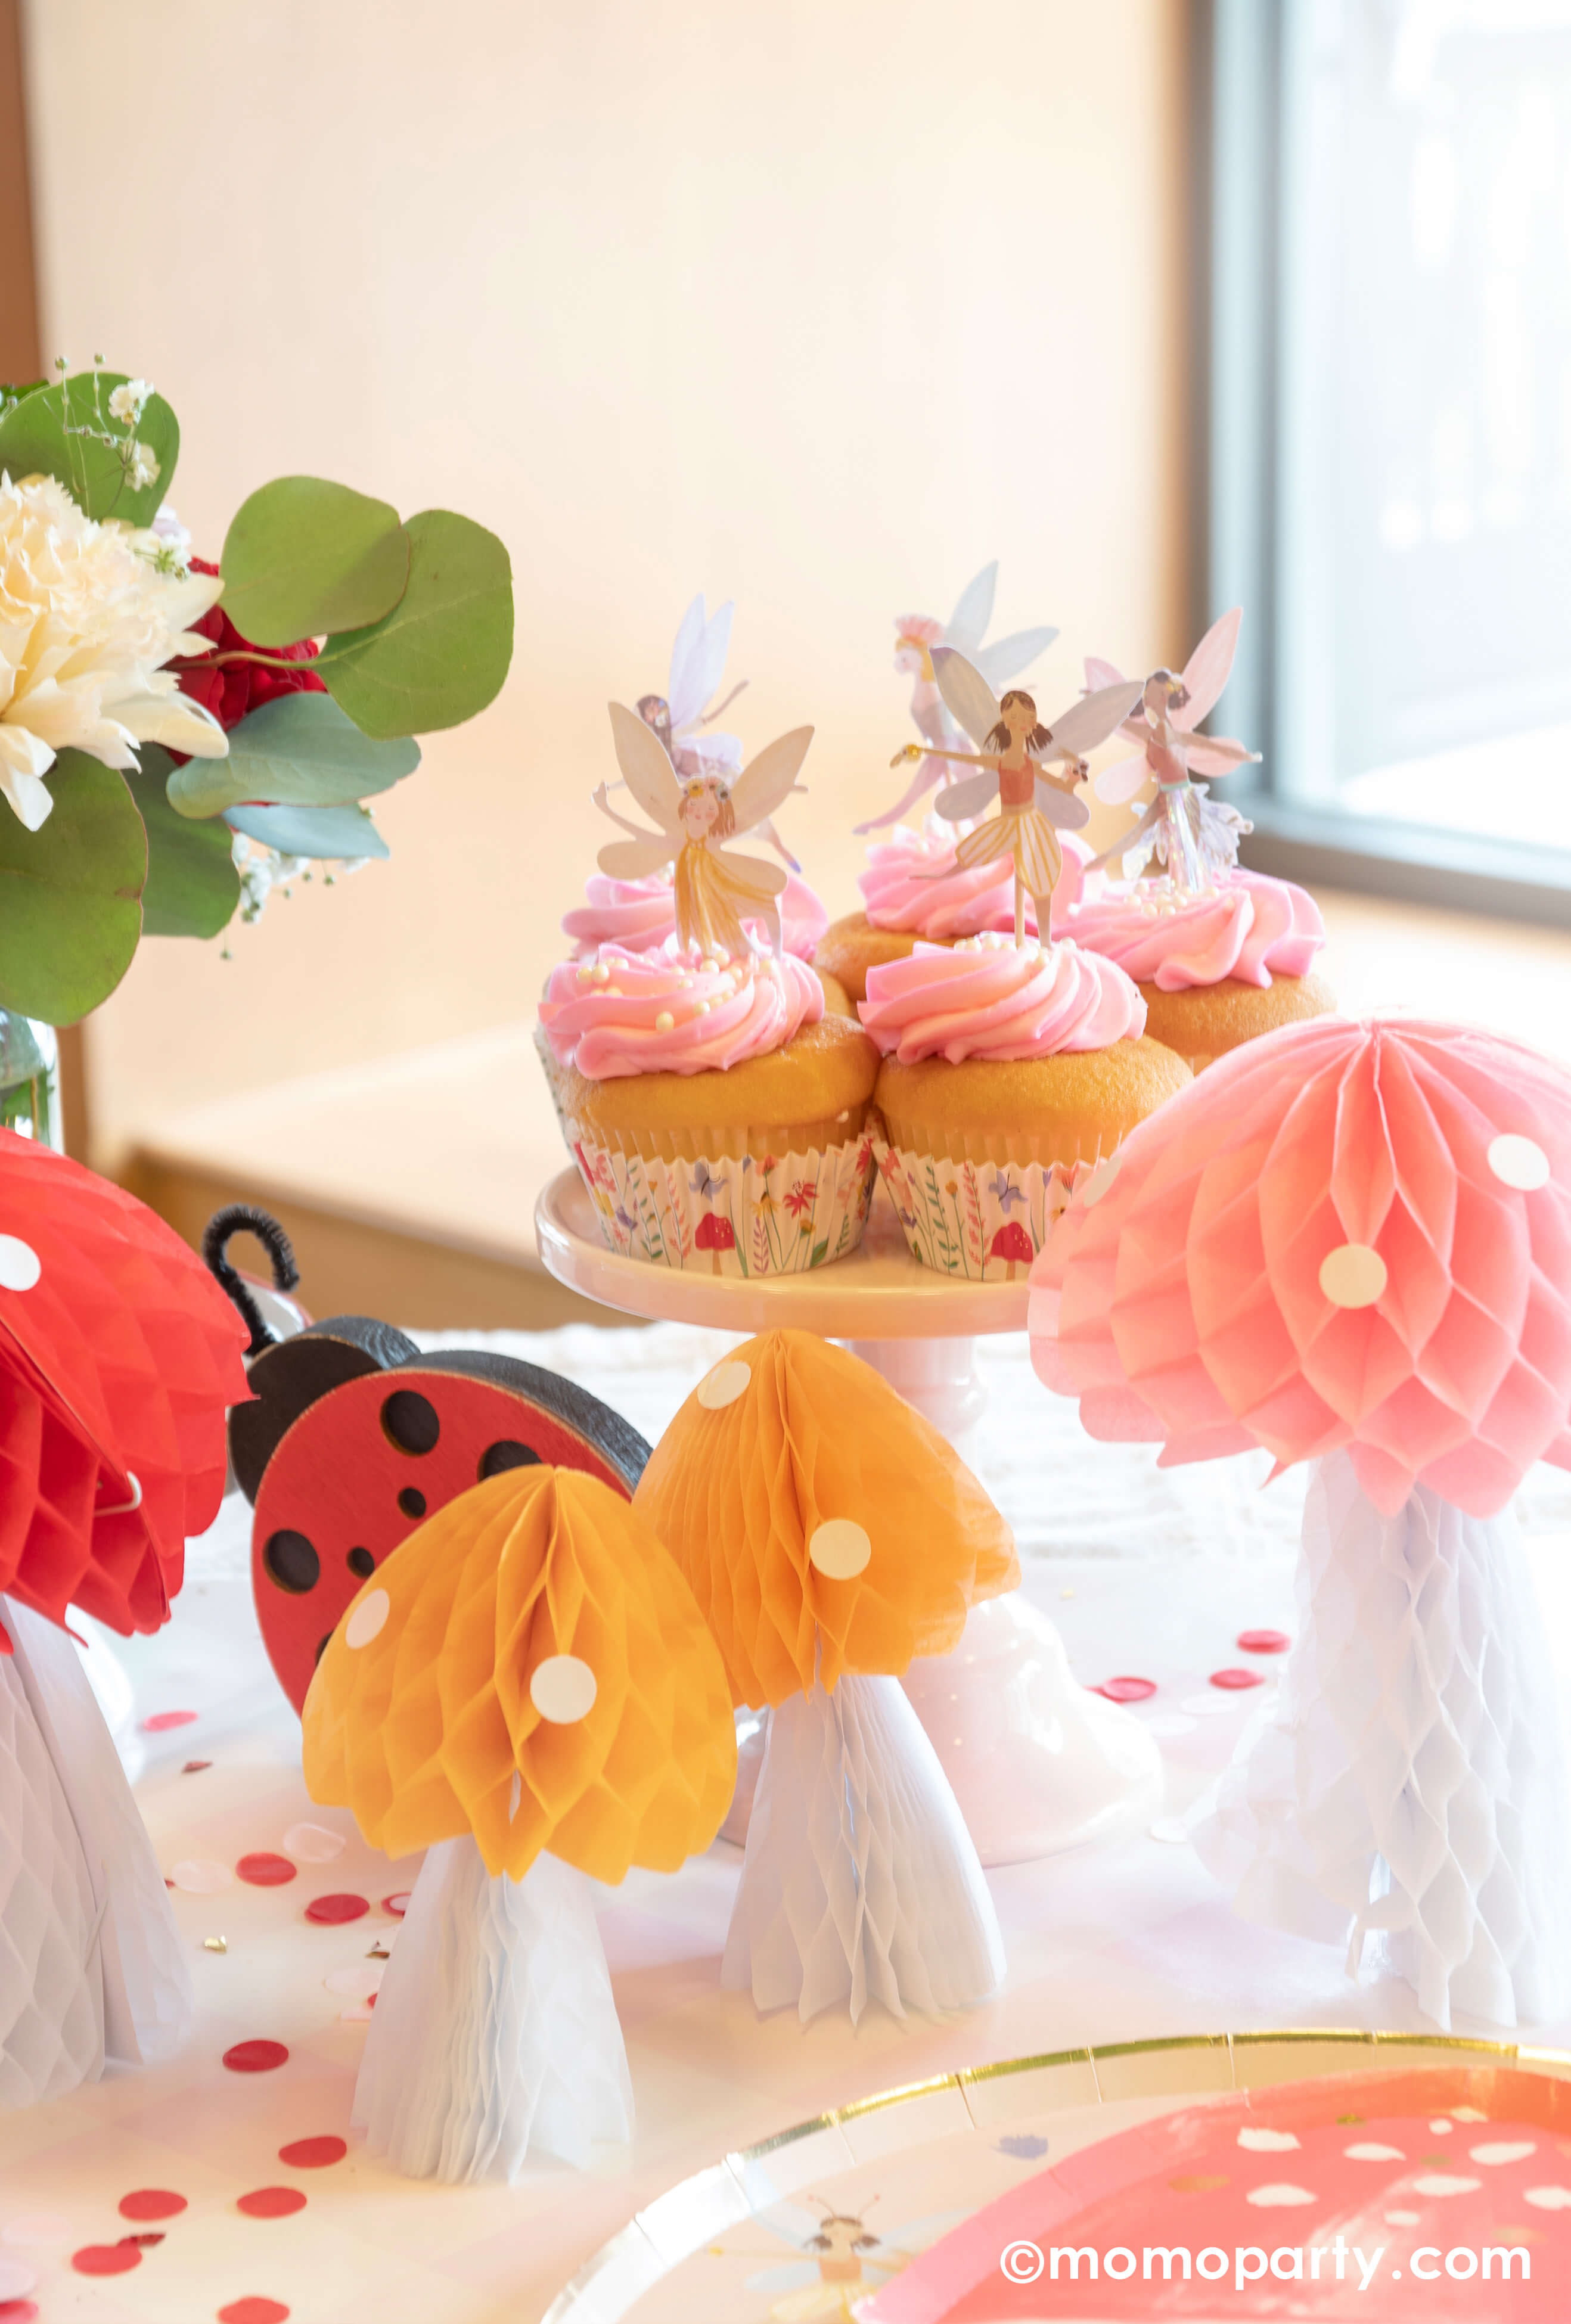 A spring fairy themed birthday party table featuring Momo Party's fairy mushroom shaped plate by Meri Meri, ladybug shaped napkin, mushroom honeycomb decoration next to pink cupcakes topped with Momo Party's fairy cupcake toppers by Meri Meri, all makes a great inspo for a spring inspired party or girl's birthday celebration.